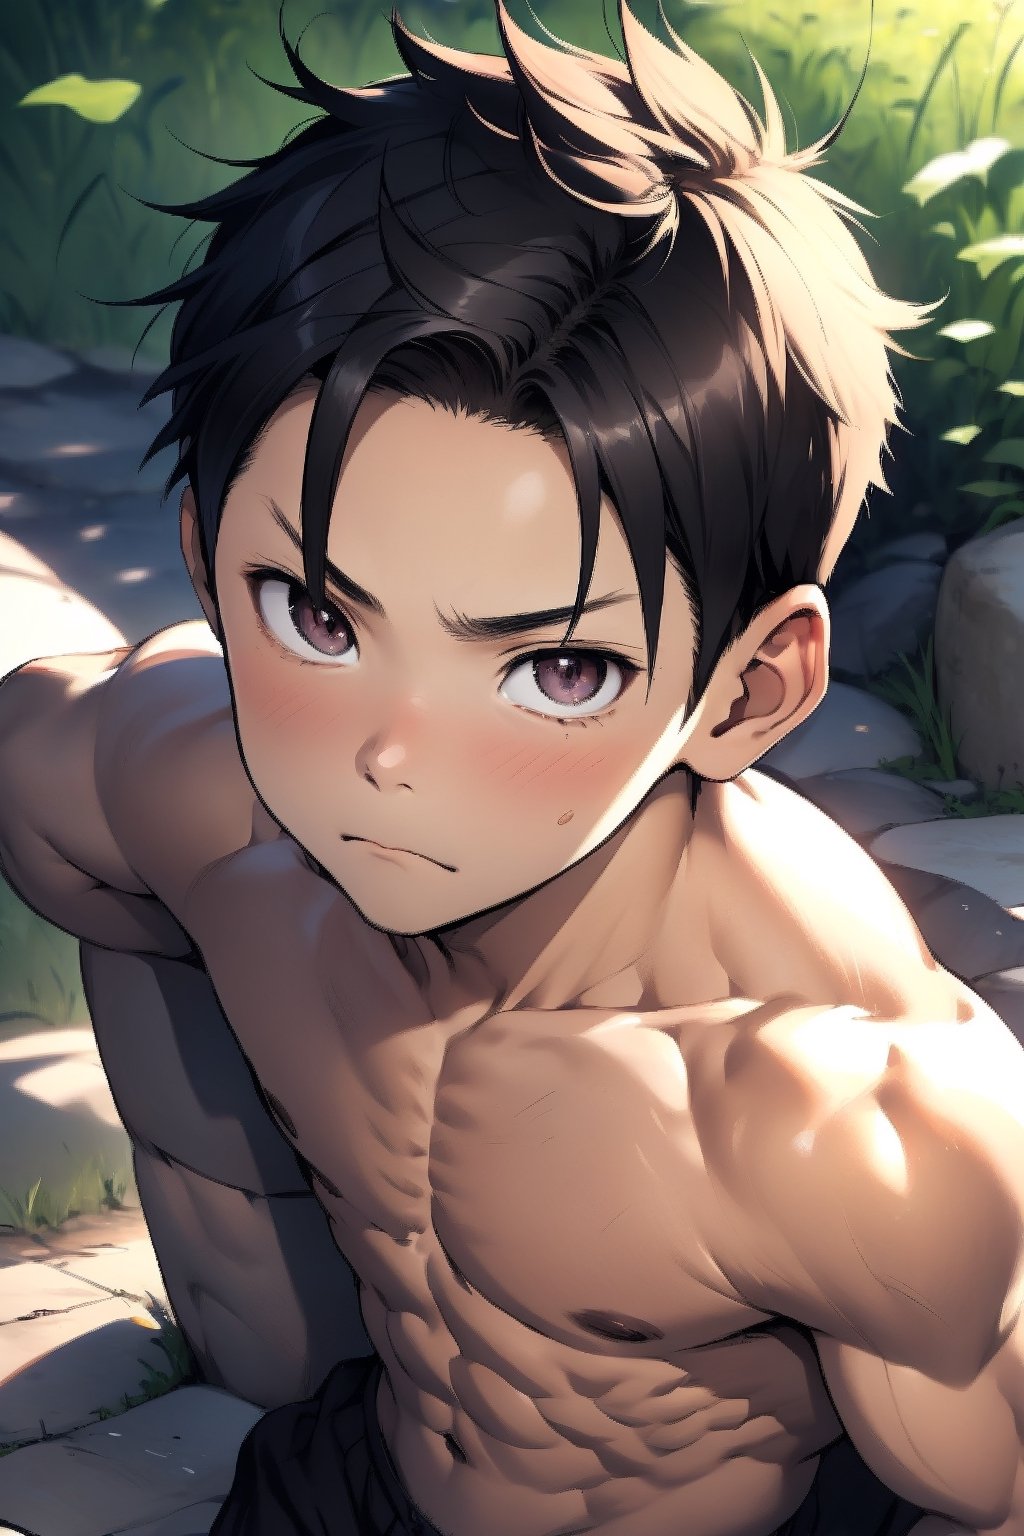 (masutepiece, Best Quality), Illustration, younge boy,teenager face, delicate big eyes, smooth skin,short round face, Flat chin, finely detaild face, well-muscled, short hair, shirtless